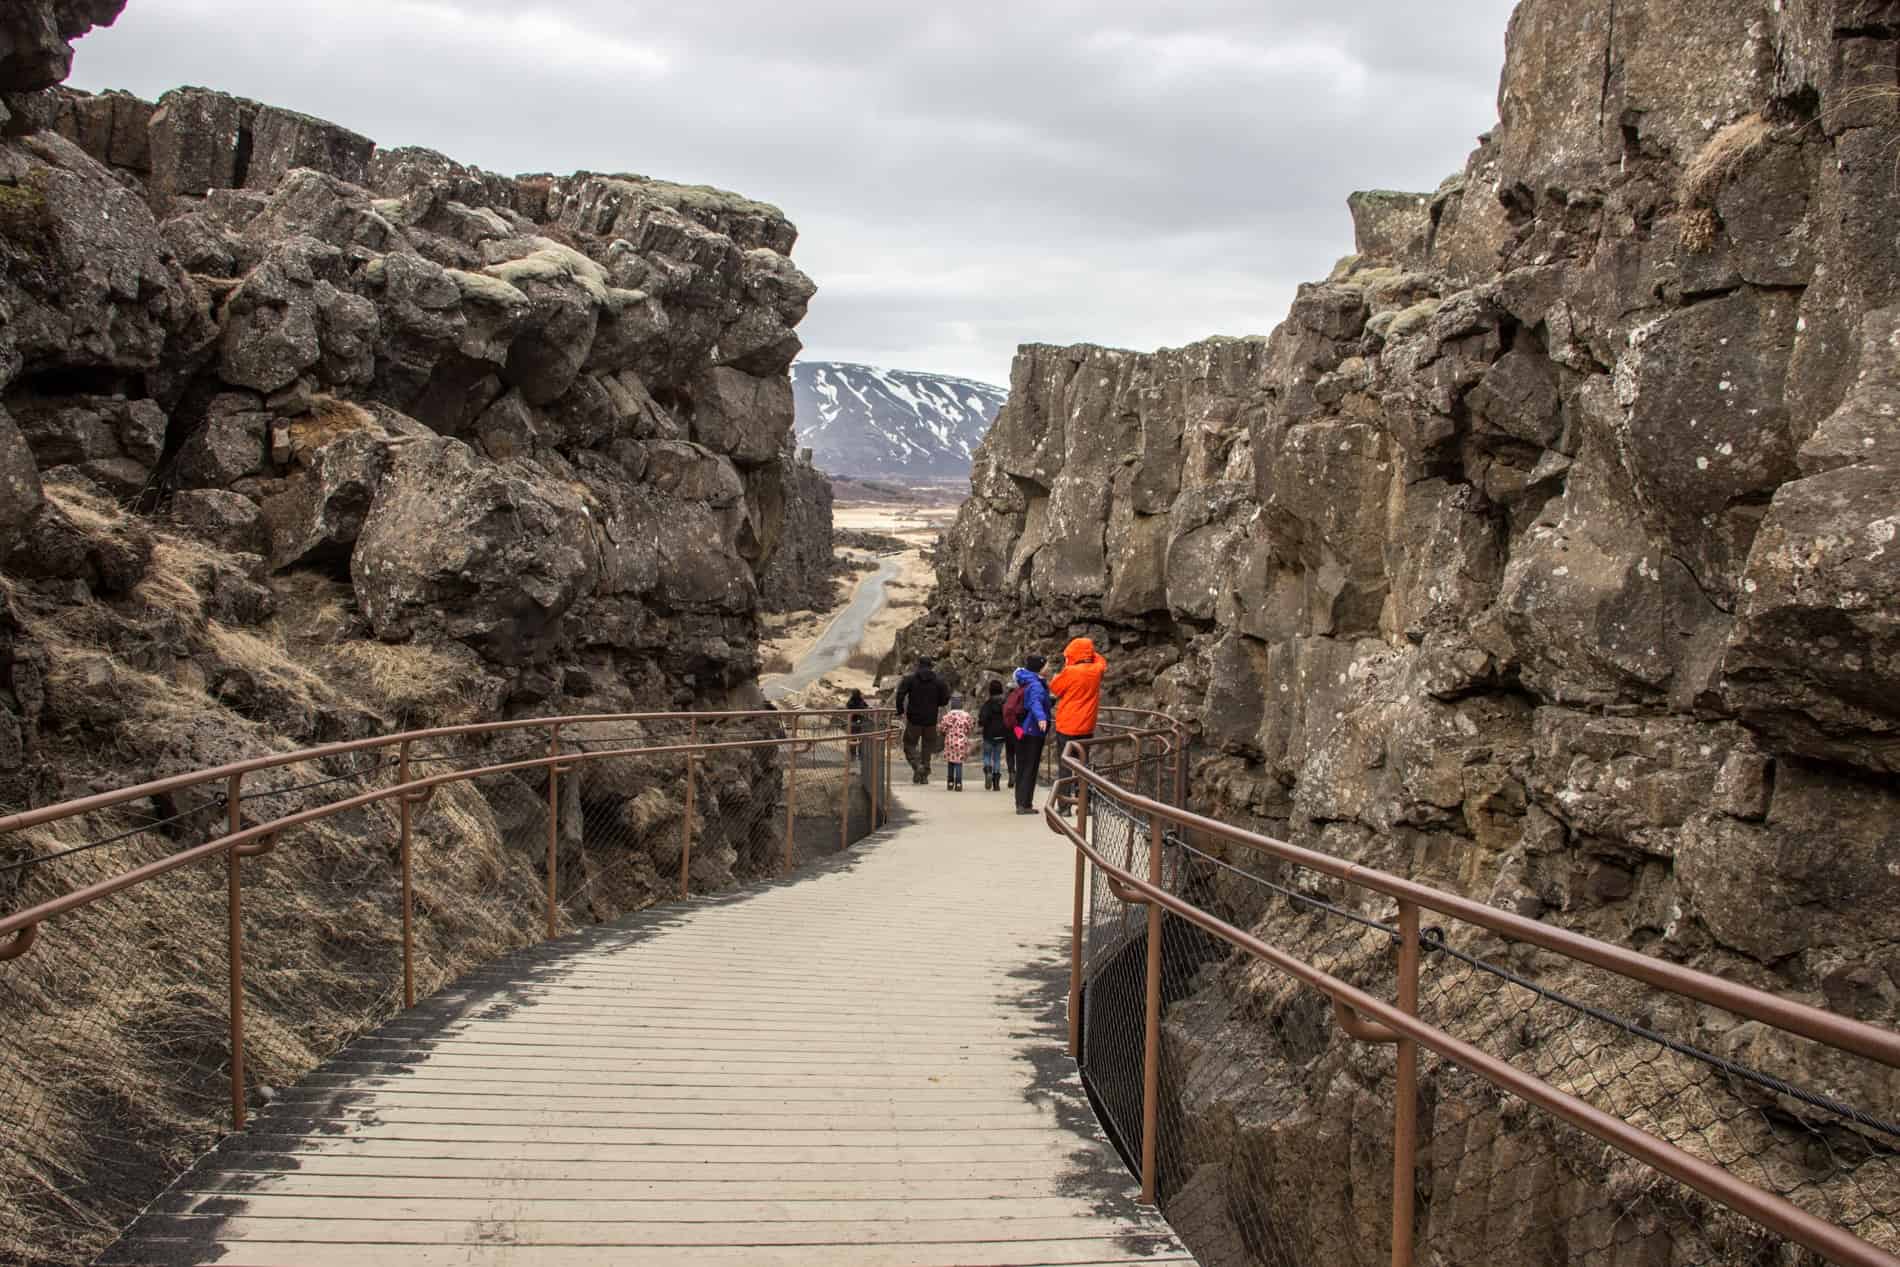 A group of people walking on a wooden platform through the rocky split of tectonic plates in Pingvellie National Park, Iceland. 